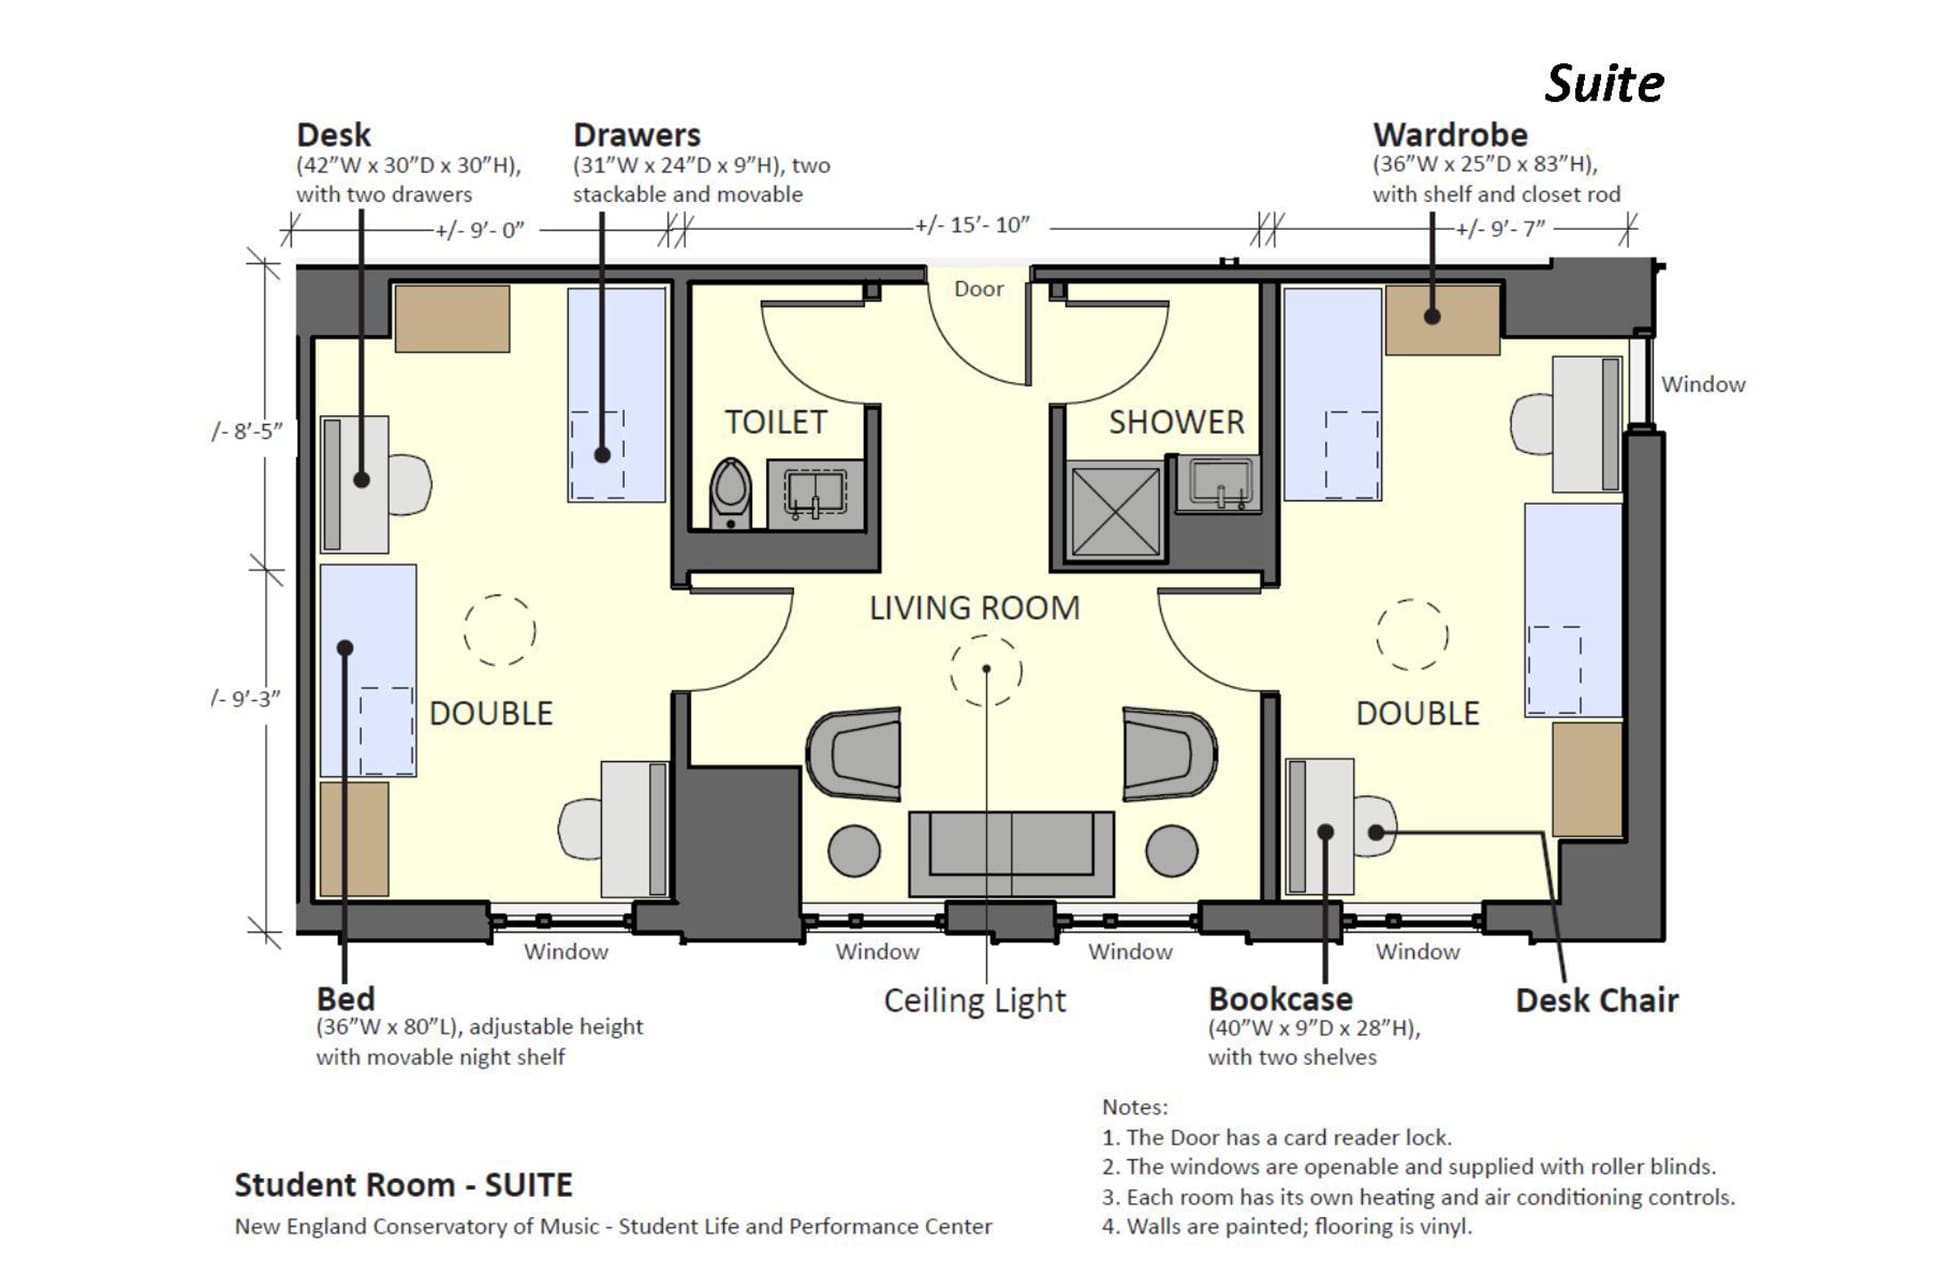 Floor plan diagram of a suite-style room in the NEC residence hall.